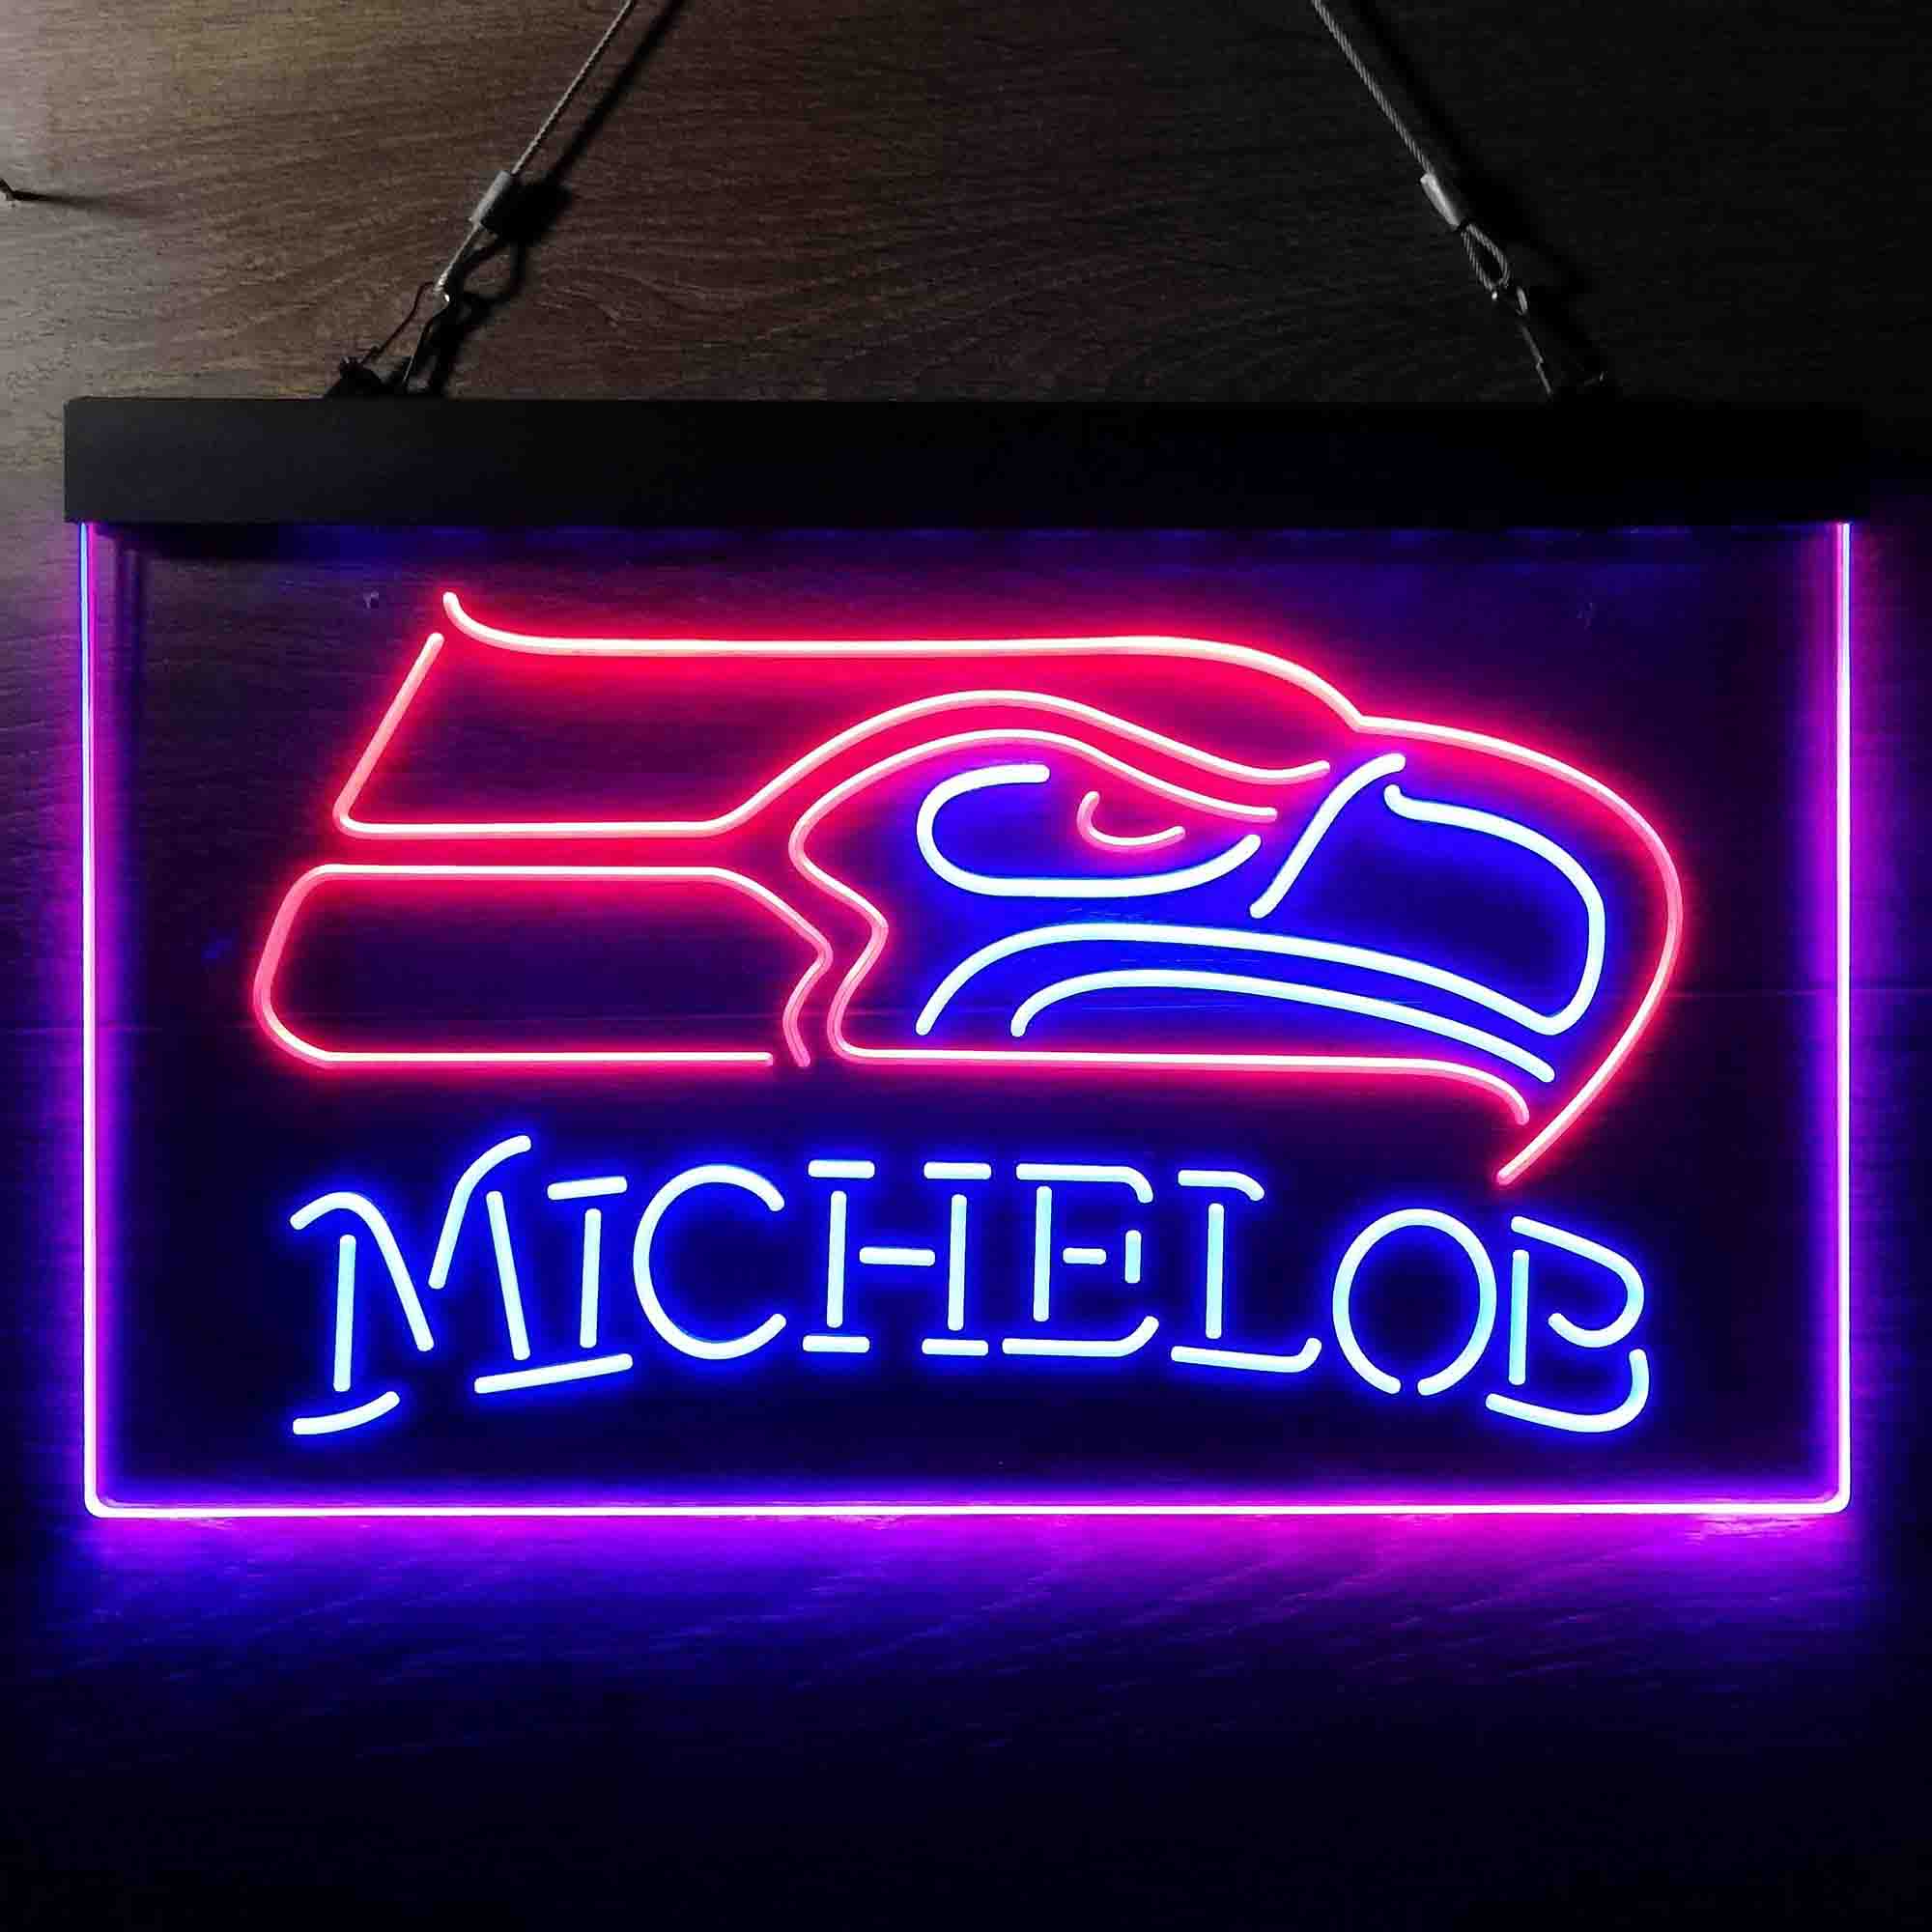 Michelob Bar Seattle Seahawks Est. 1976 LED Neon Sign